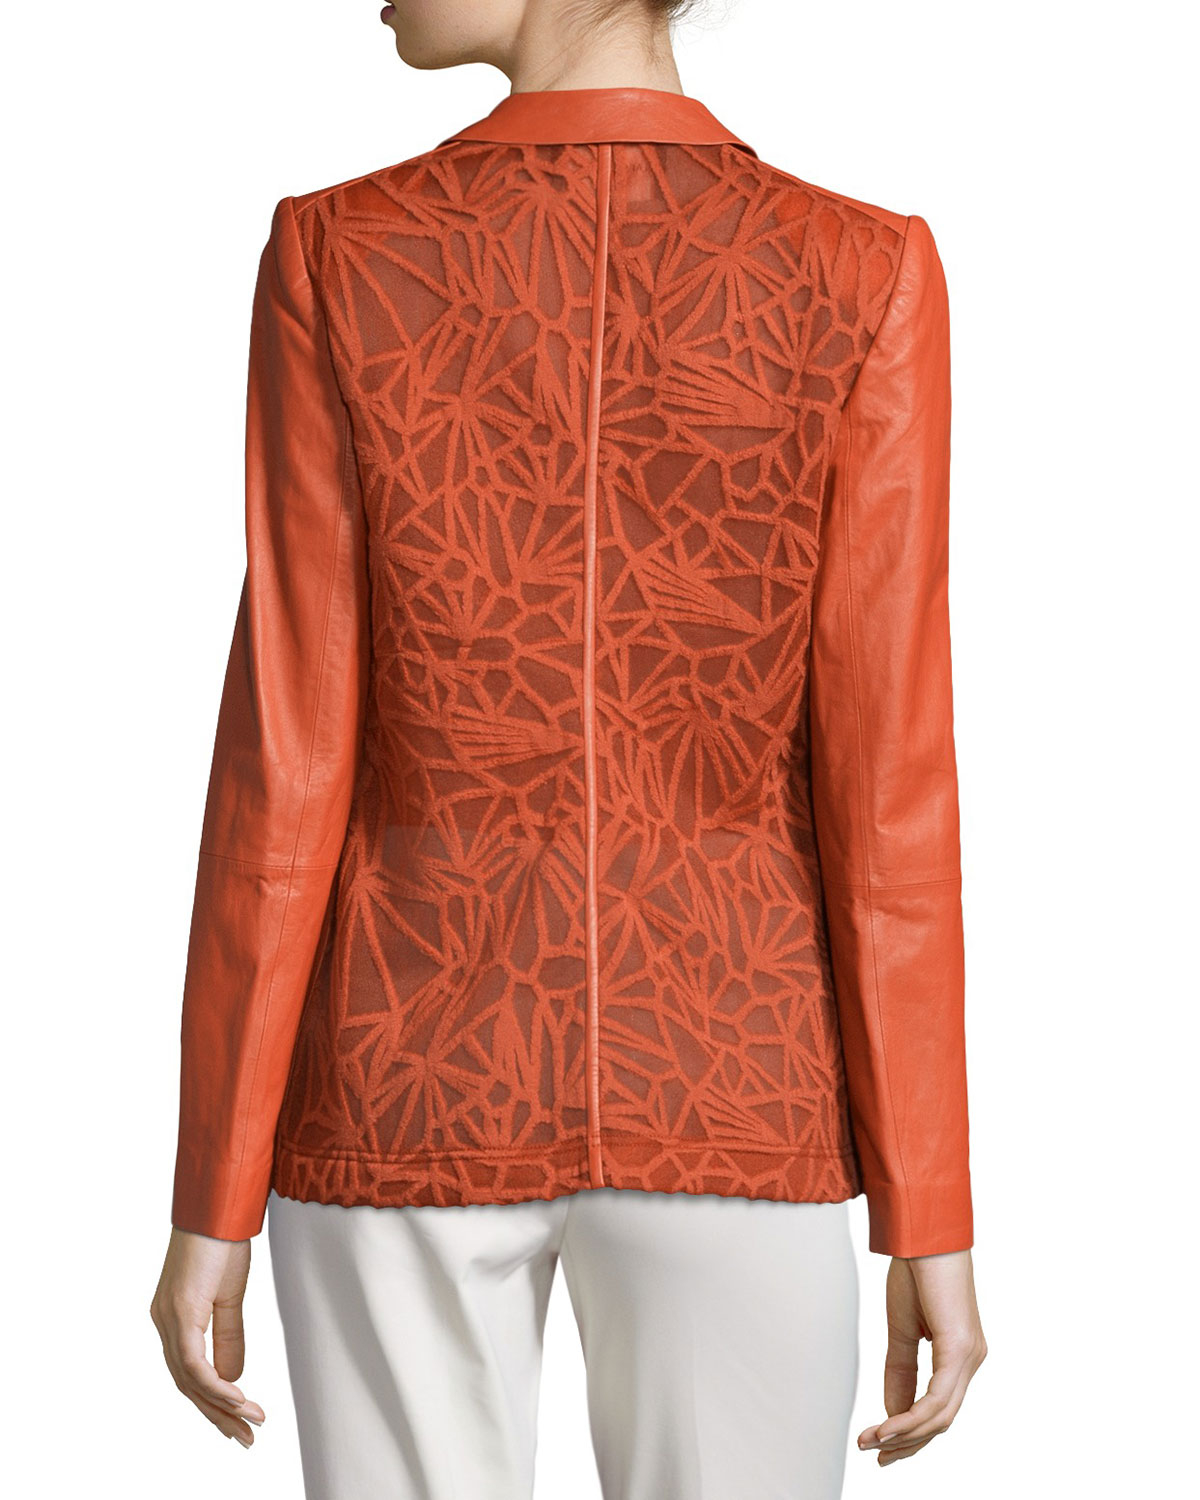 Lyst - Lafayette 148 New York Stelly Leather Lace Jacket in Red